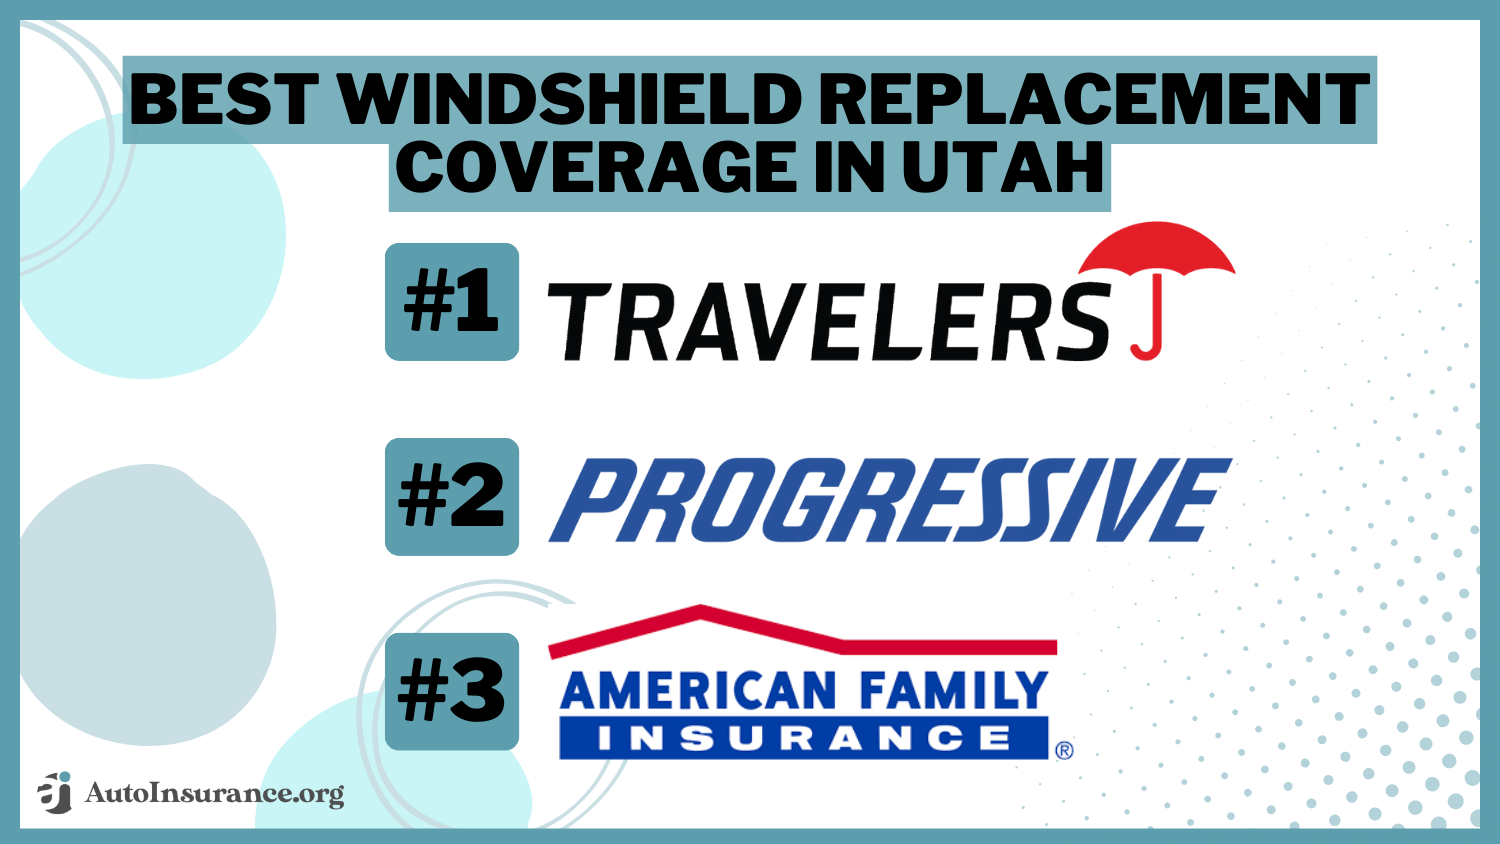 Best Windshield Replacement Coverage in Utah: Travelers, Progressive, and American Family